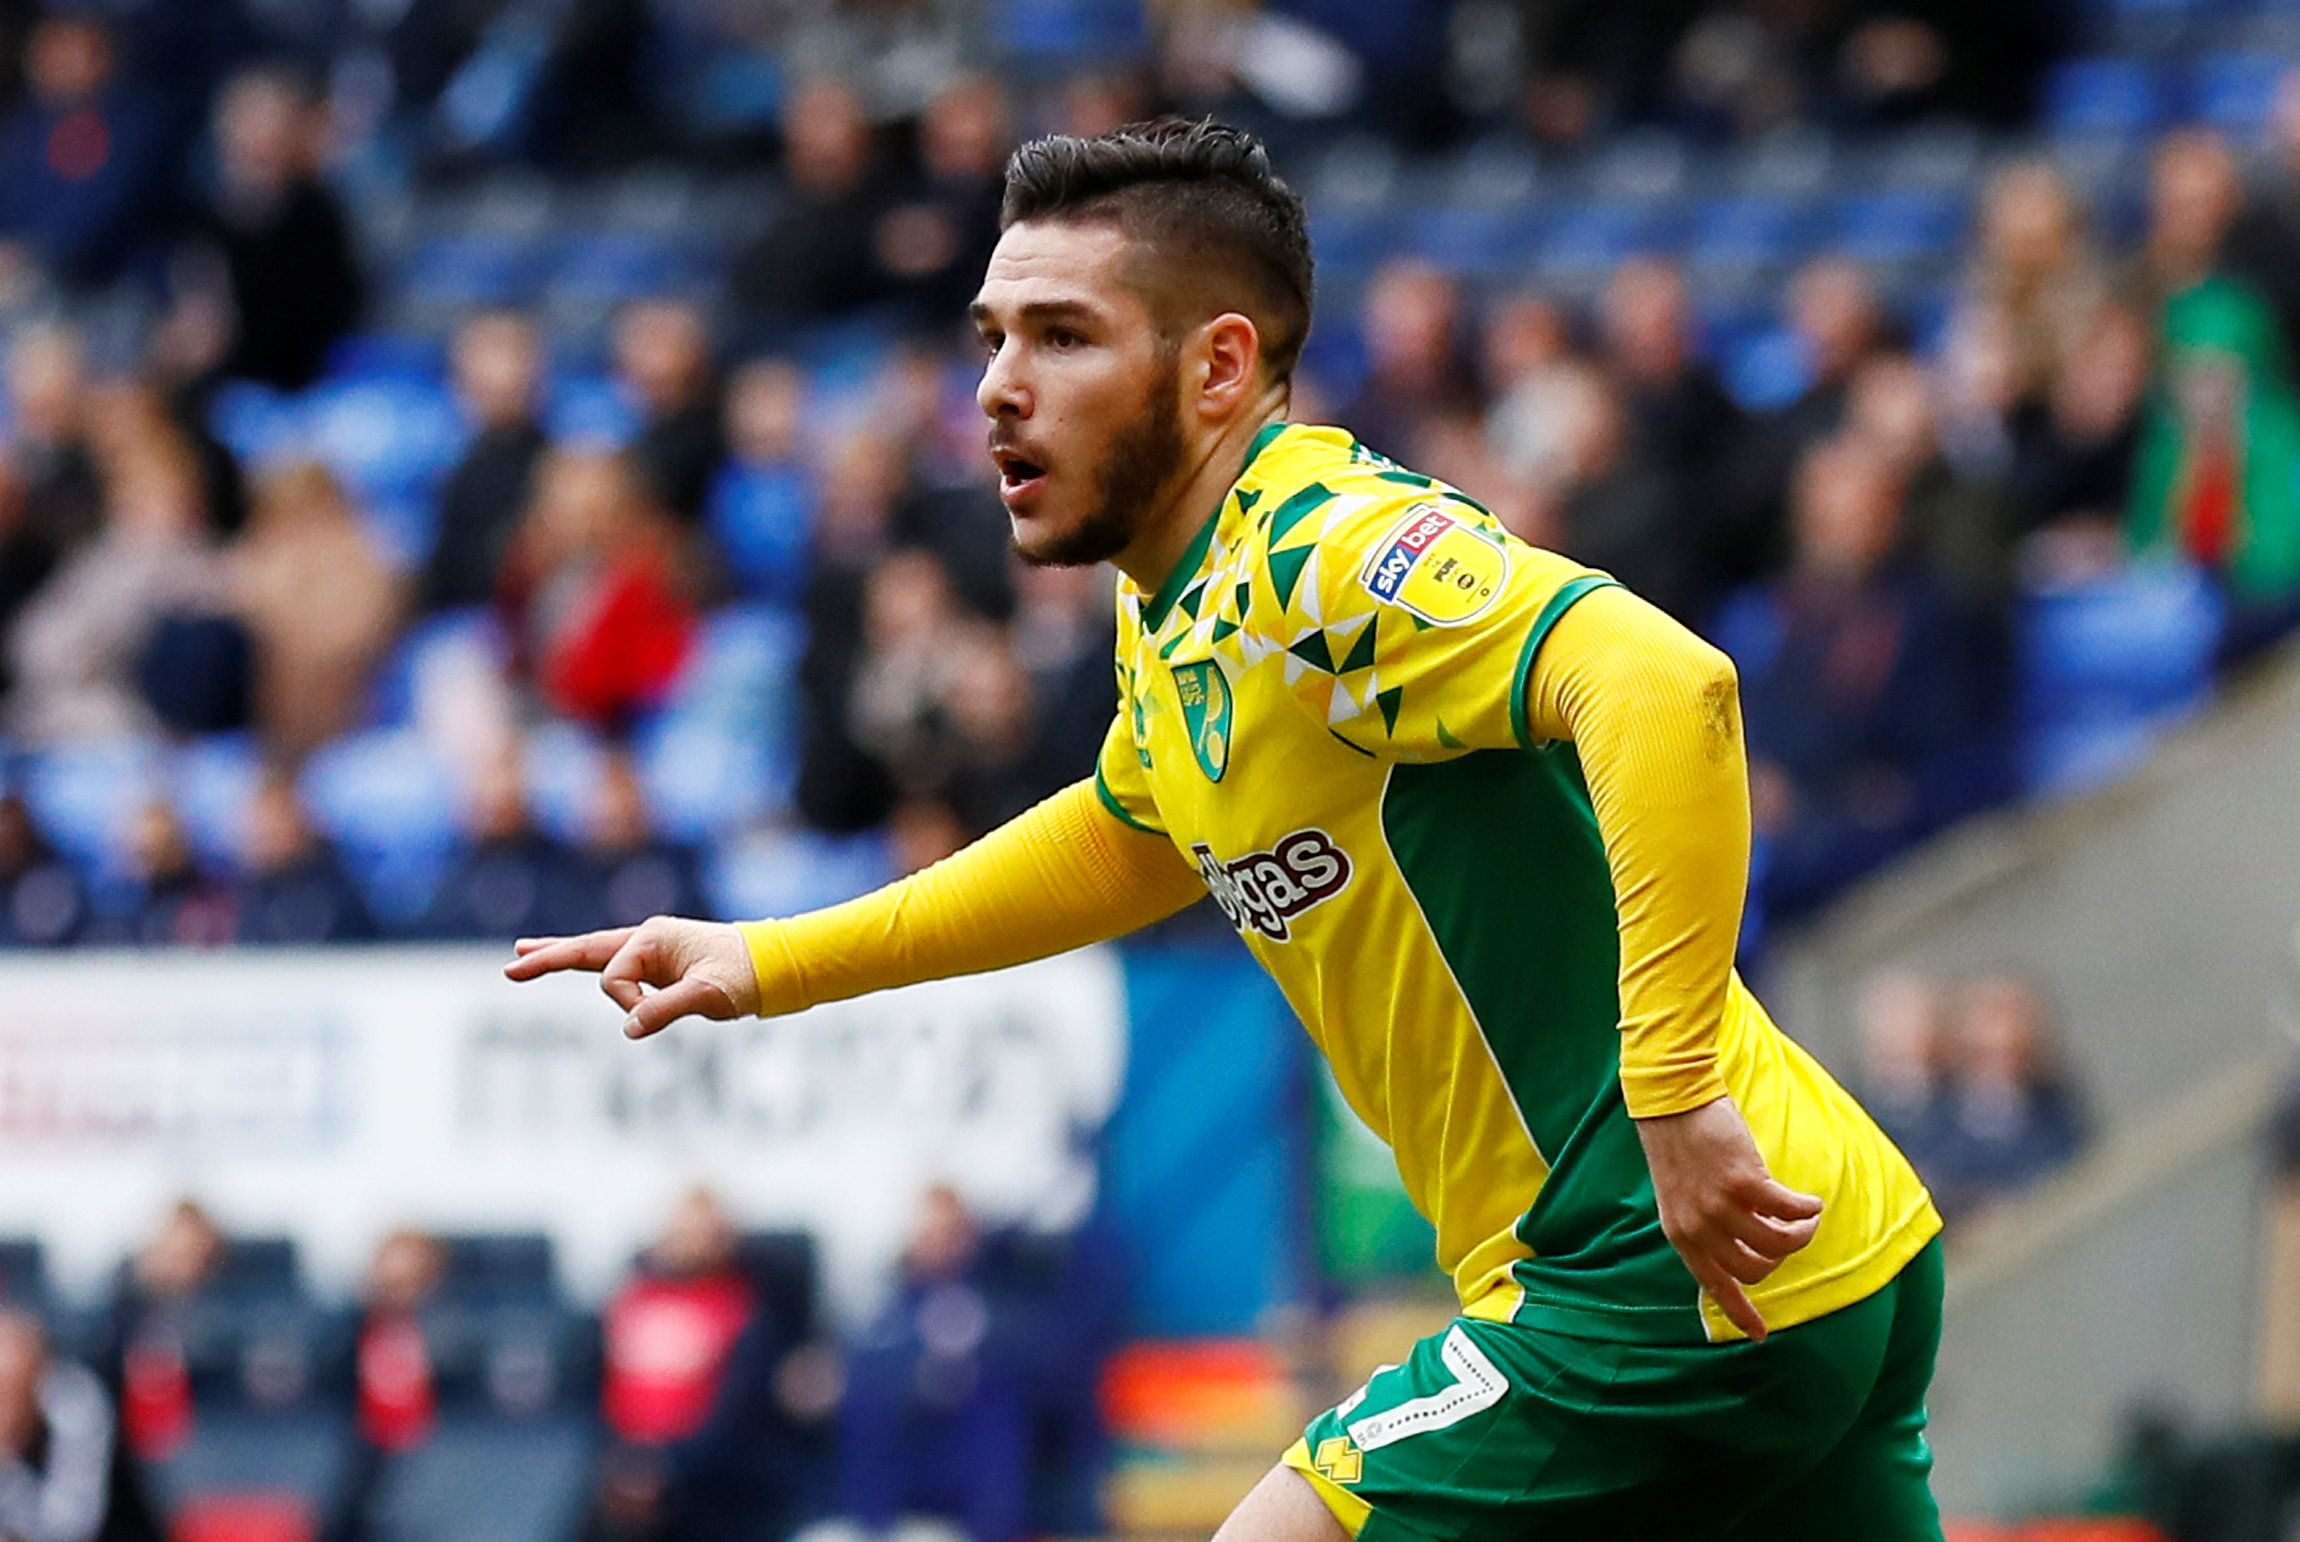 Soccer Football - Championship - Bolton Wanderers v Norwich City - University of Bolton Stadium, Bolton, Britain - February 16, 2019   Norwich City's Emiliano Buendia celebrates scoring their third goal    Action Images/Jason Cairnduff    EDITORIAL USE ONLY. No use with unauthorized audio, video, data, fixture lists, club/league logos or 